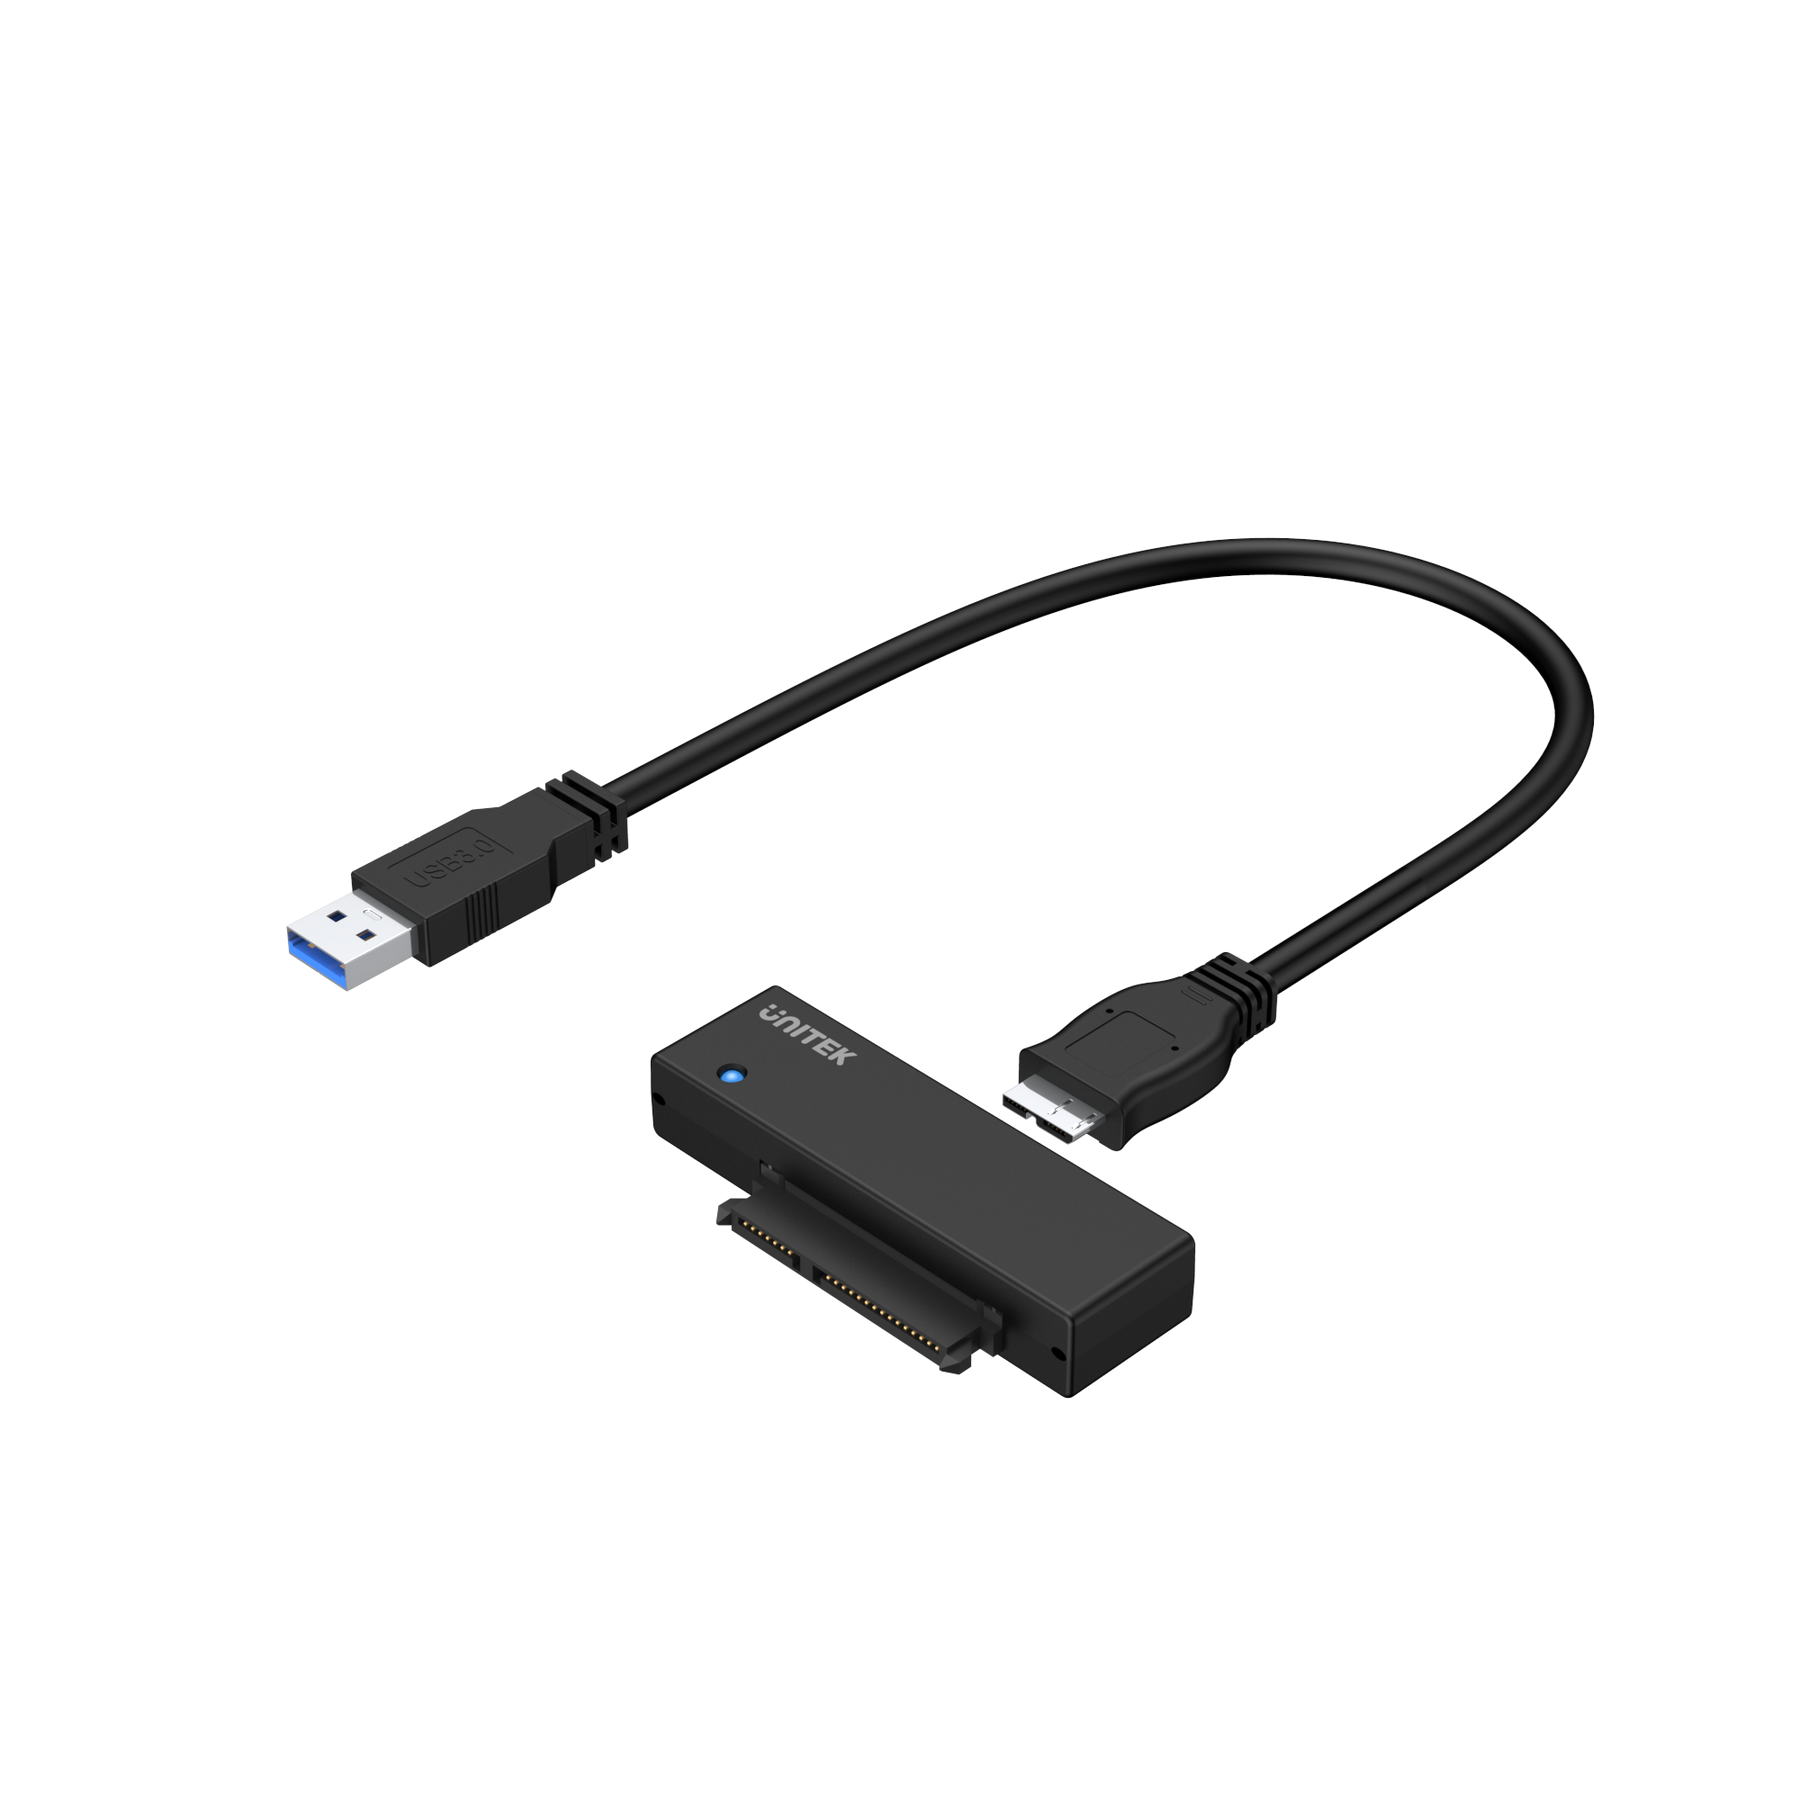 USB 3.0 to SATA III (With 12V2A Power Adapter)